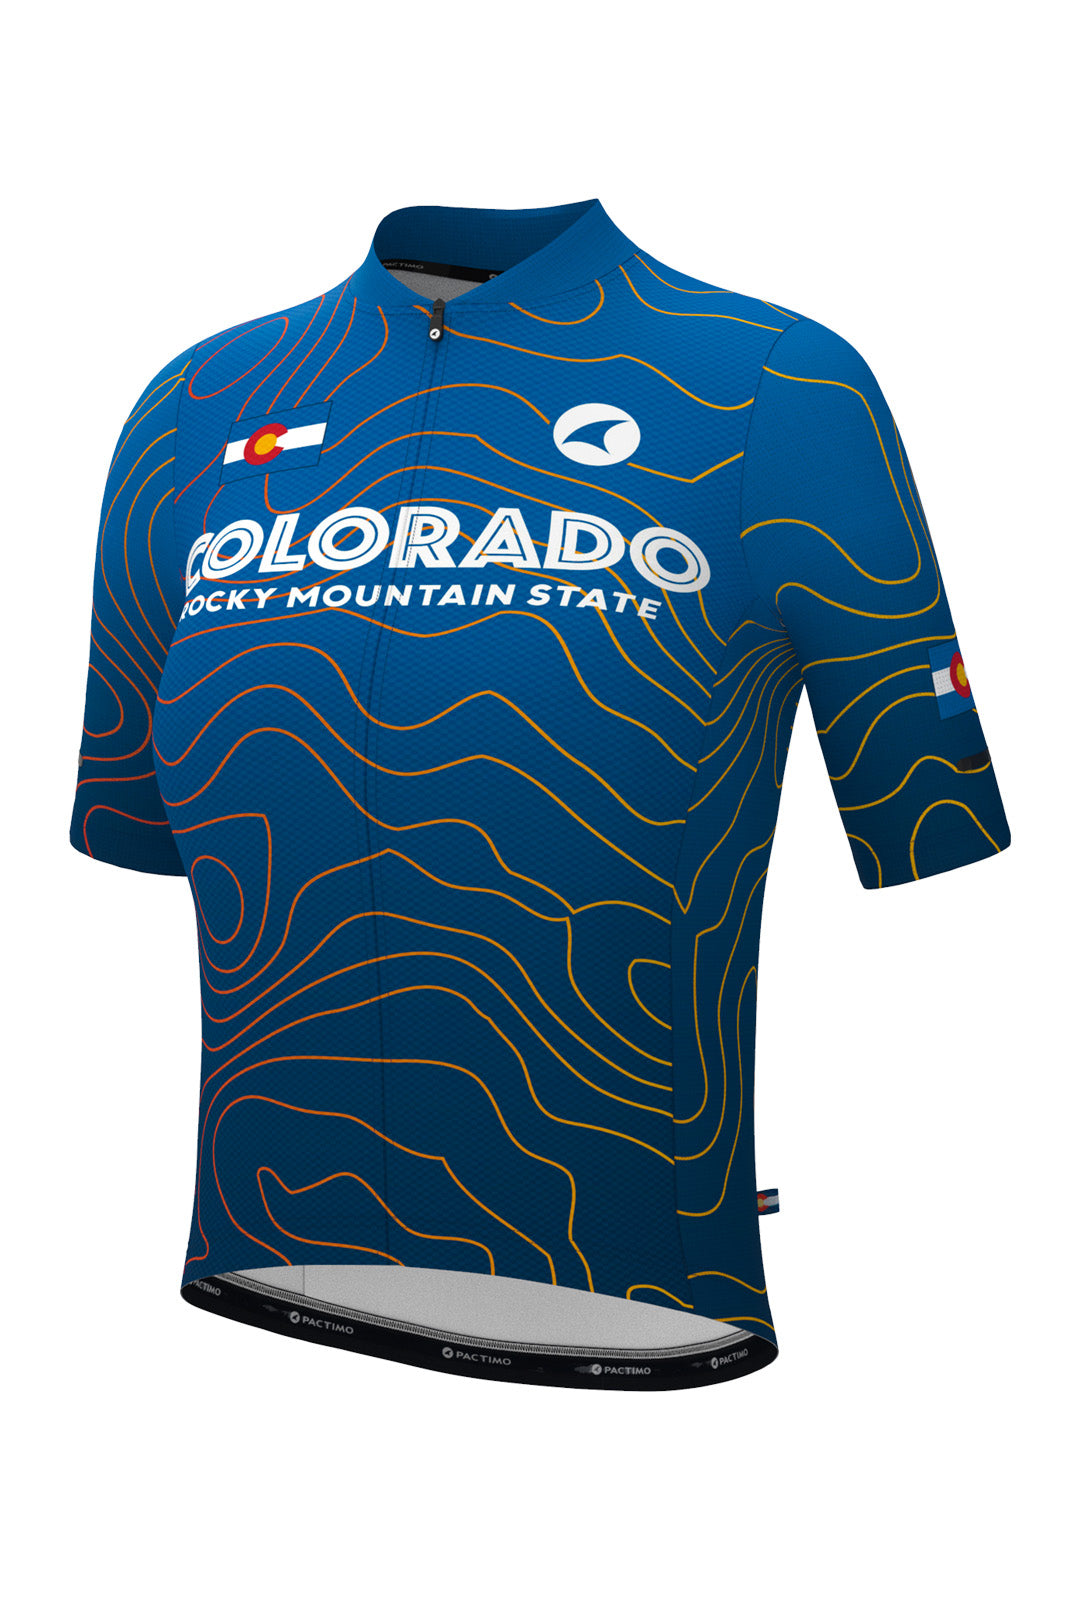 Women's Colorado Cycling Jersey - Ascent Aero Dusk Ombre Front View 